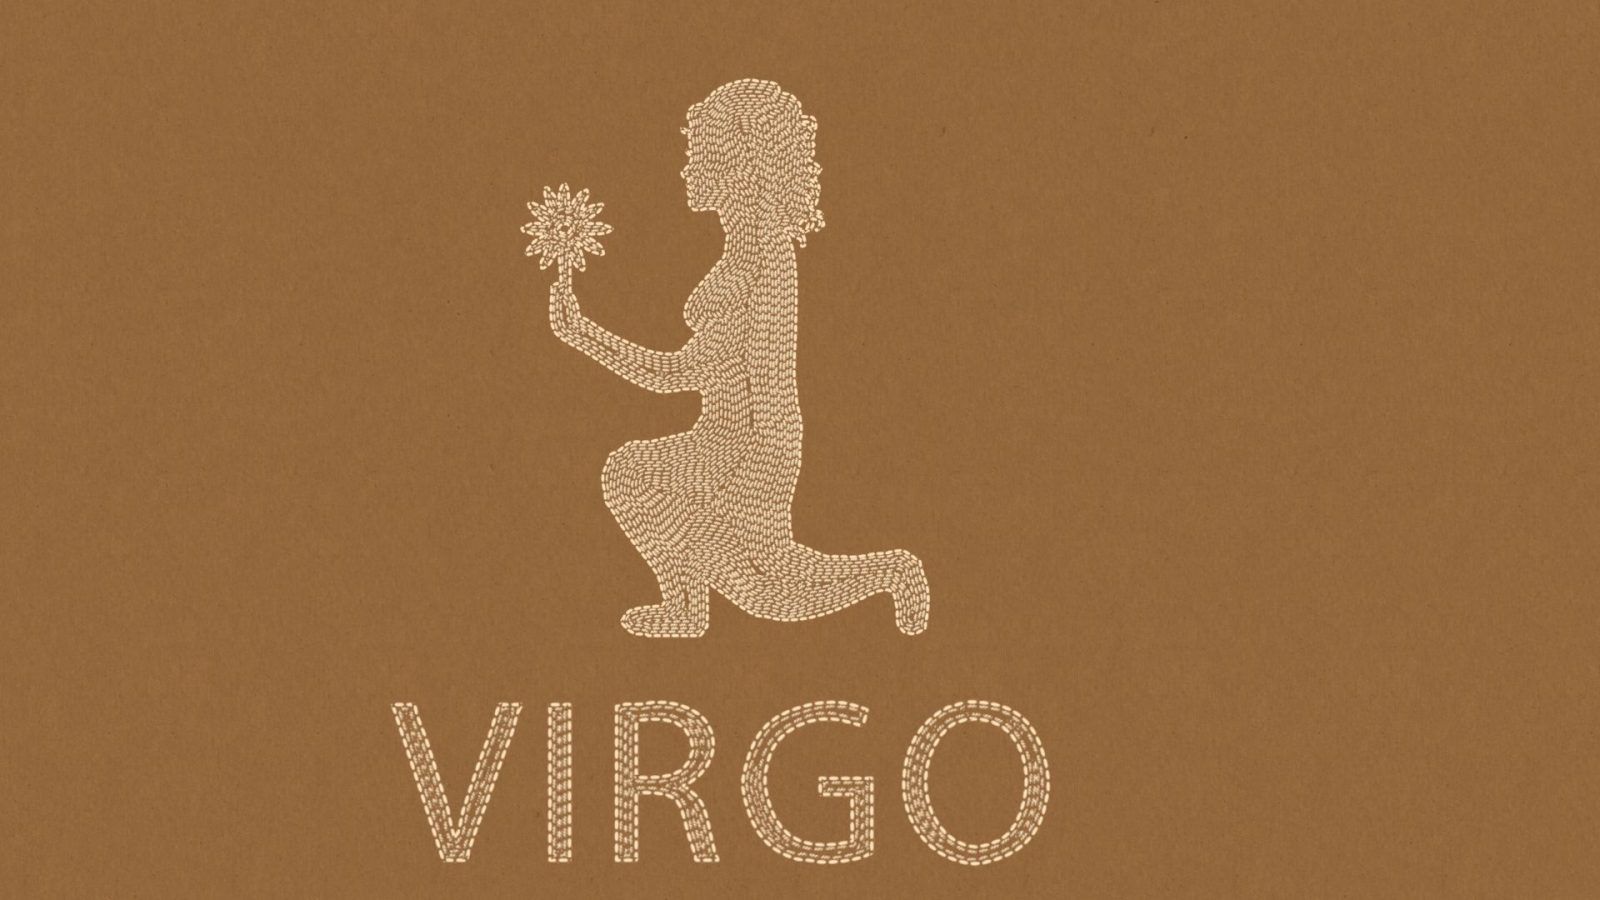 Virgo season: All You need to know about the Virgo zodiac sign